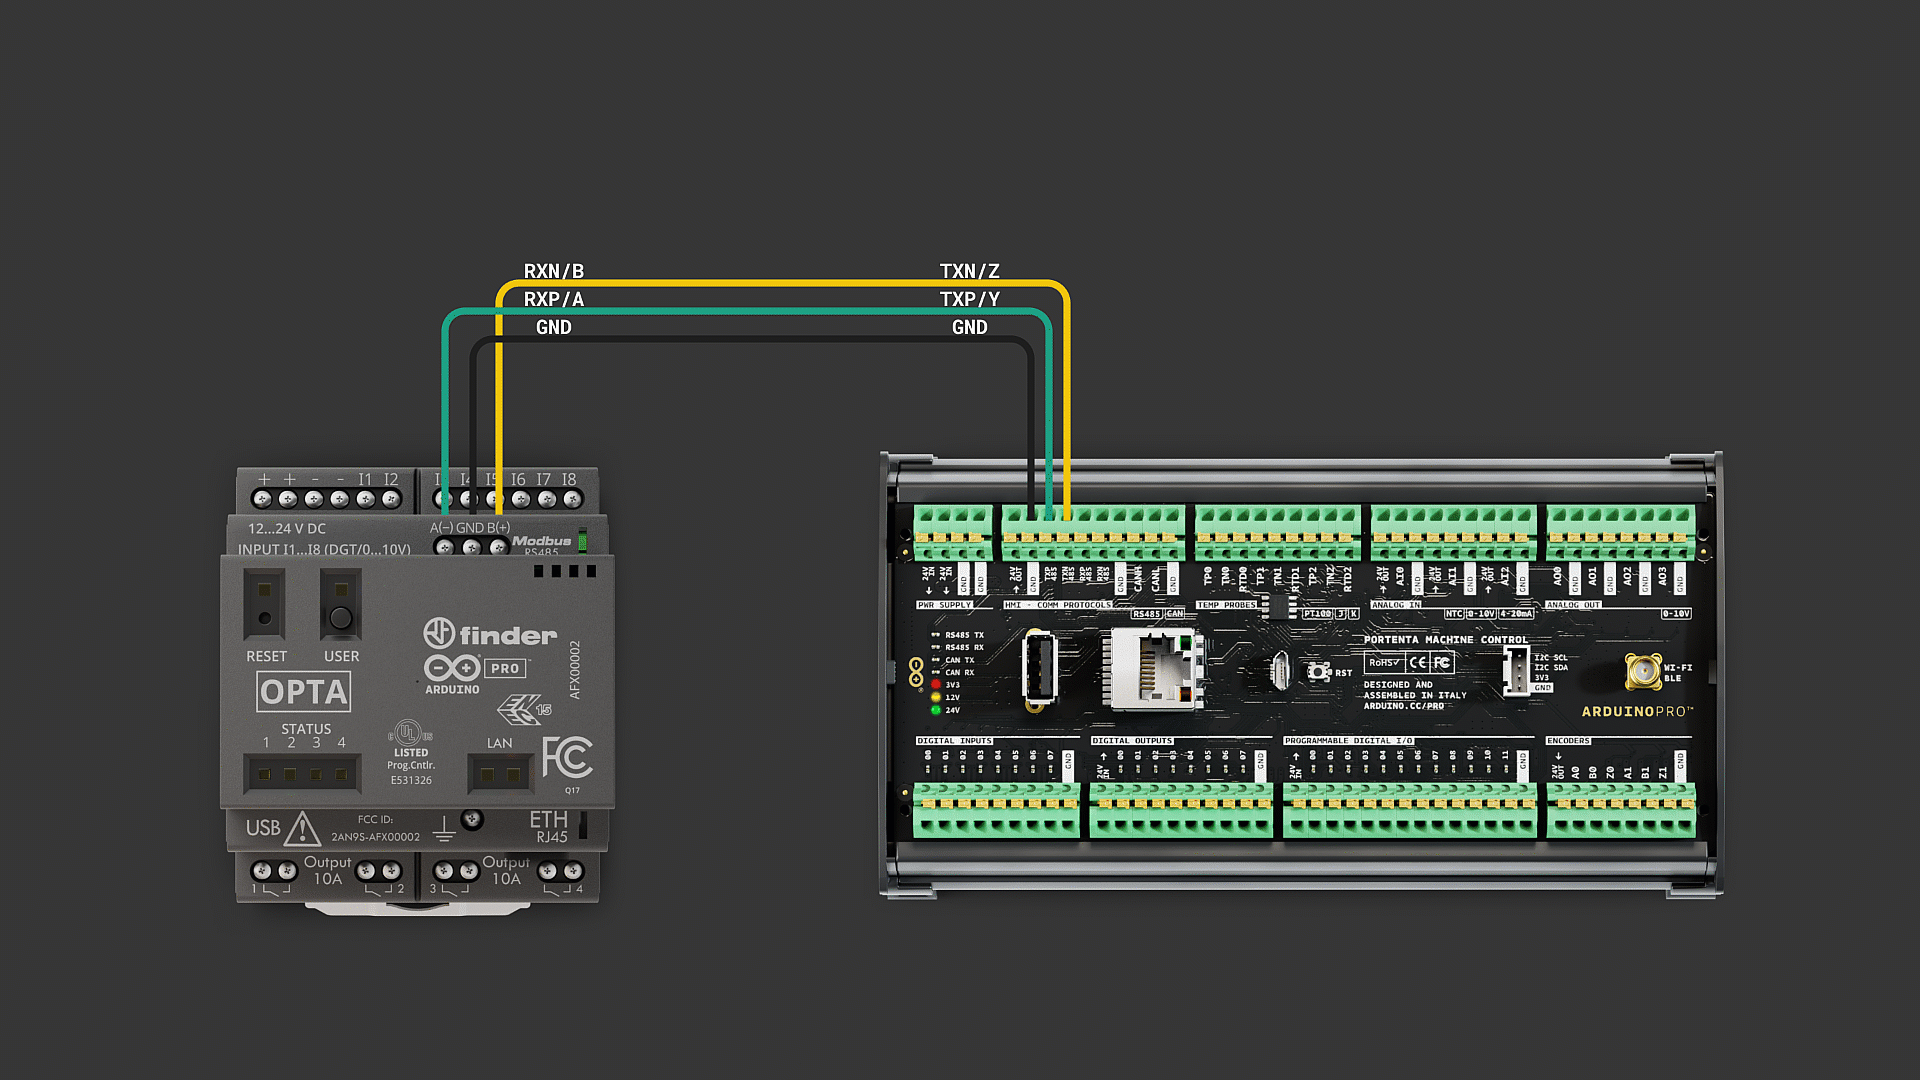 Onboard LEDs of an Opta™ device controlled by a Portenta Machine Control device via Modbus TCP